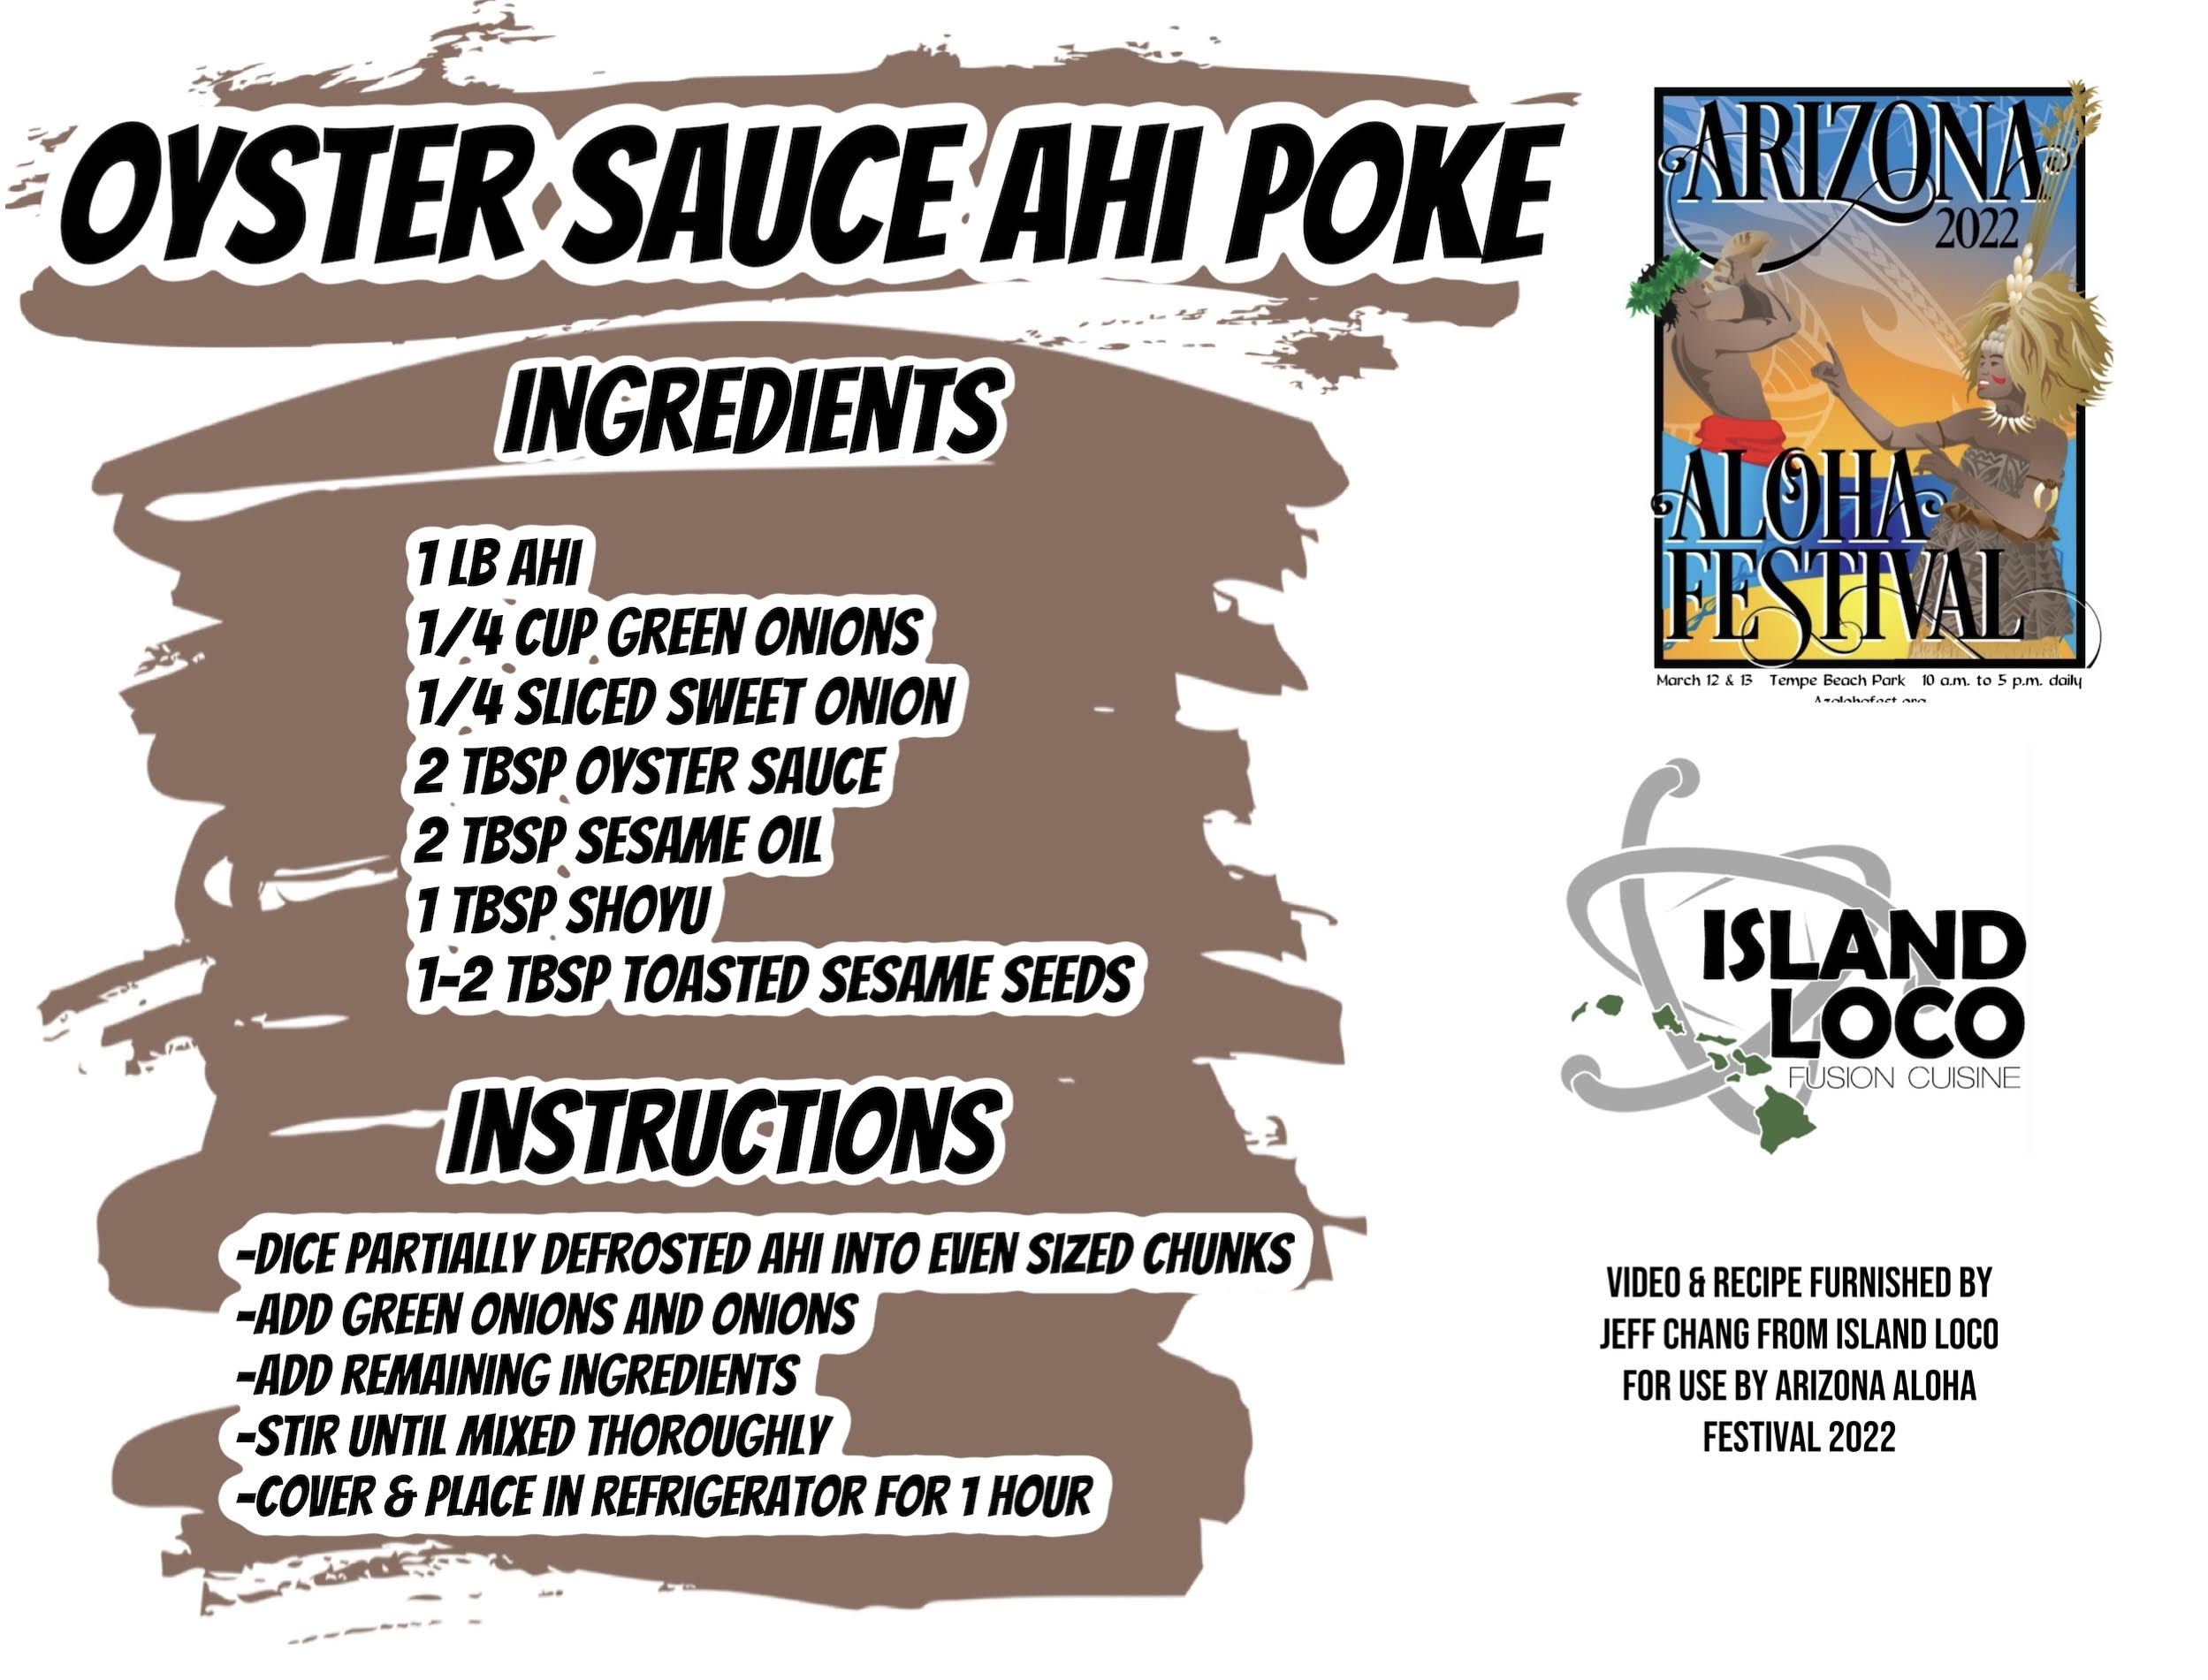 REcipe for poke with oyster sauce